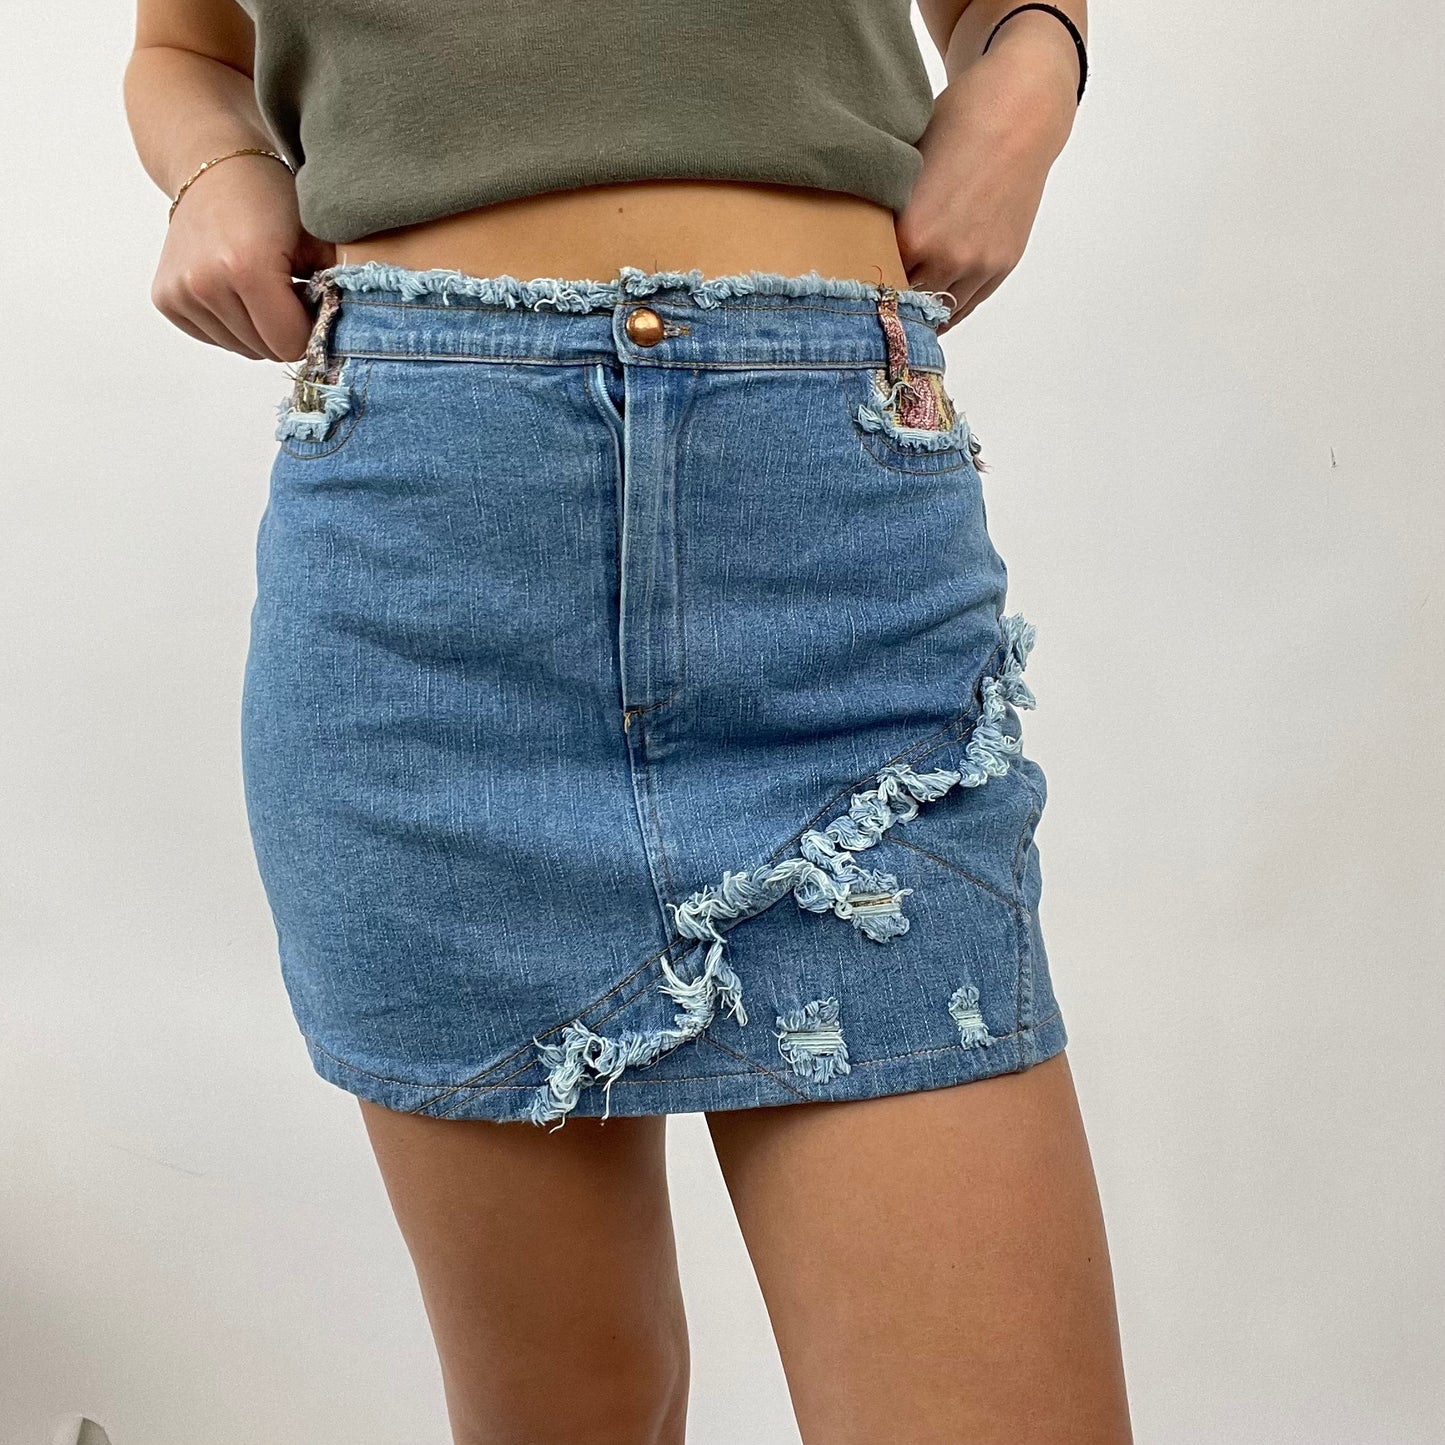 COTTAGECORE DROP | small denim skirt with patterned detail